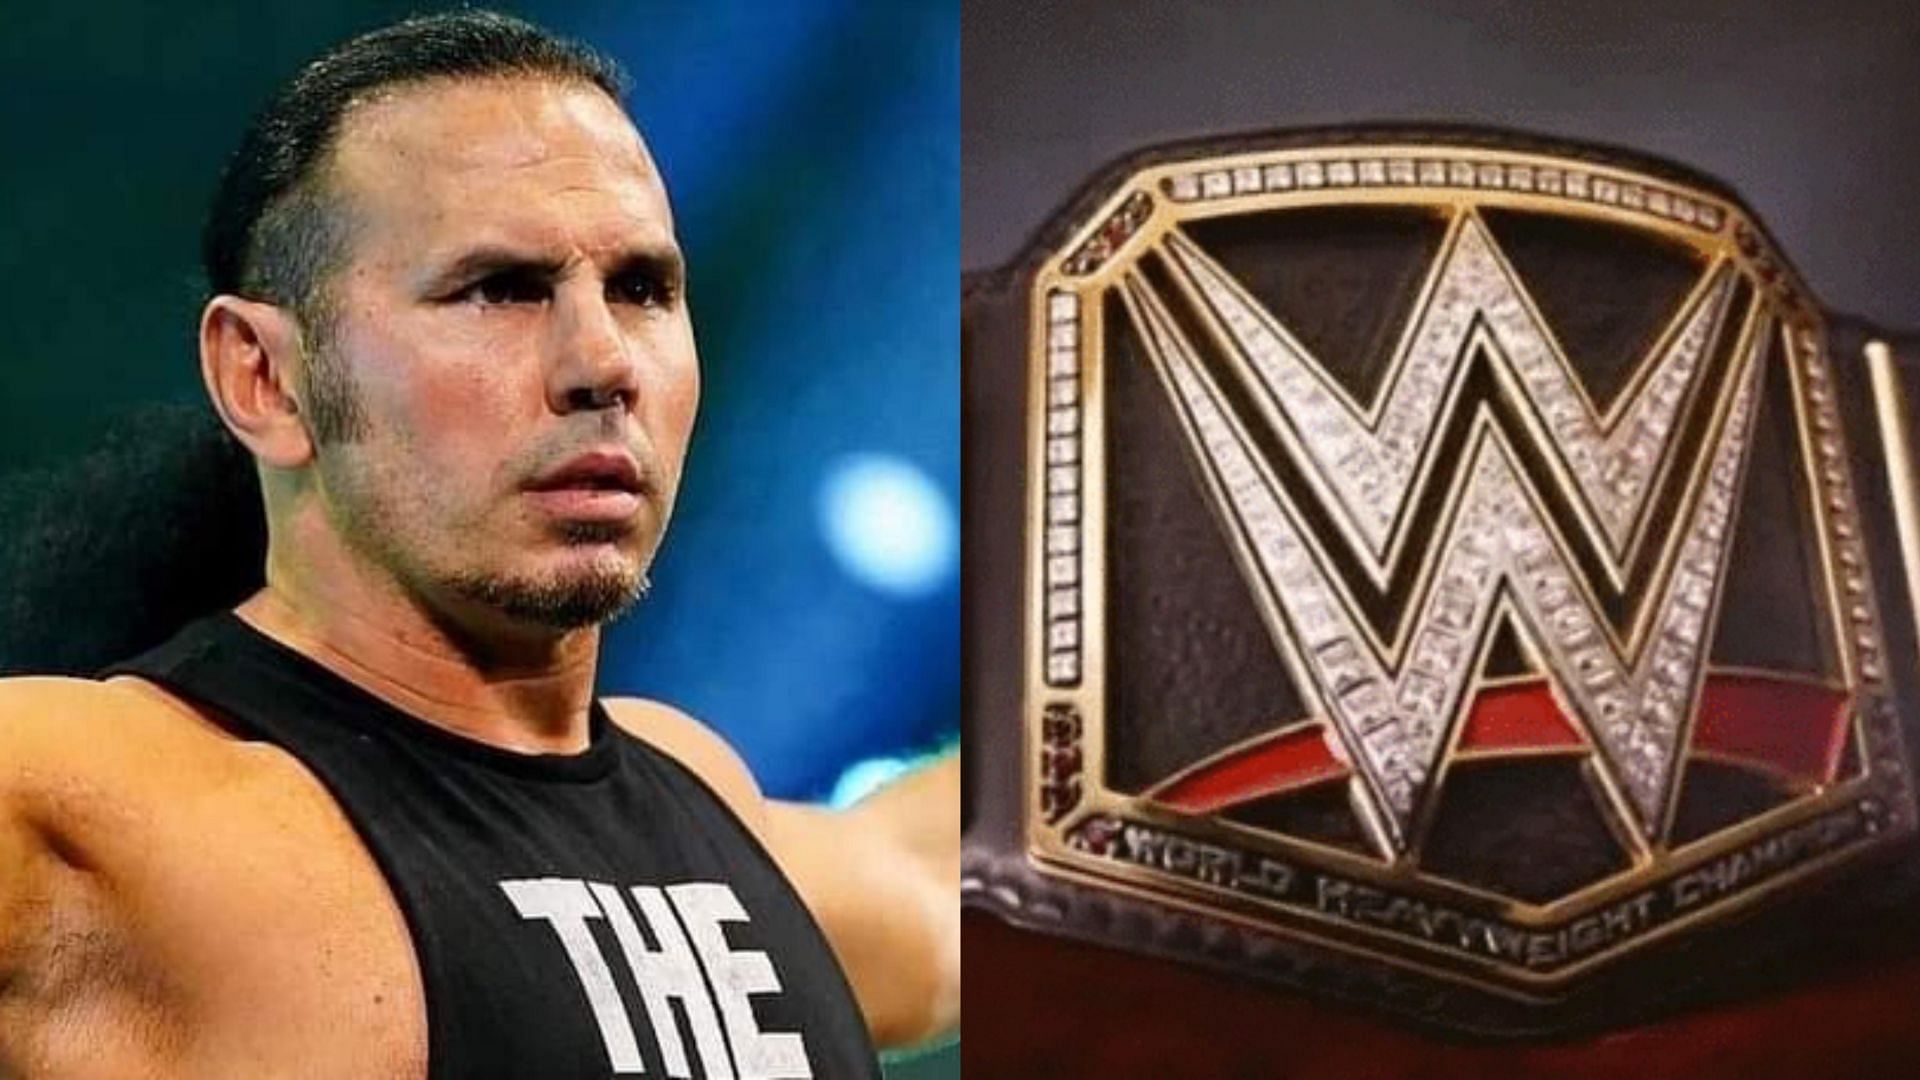 Matt Hardy has been in the wrestling business for 30 years.